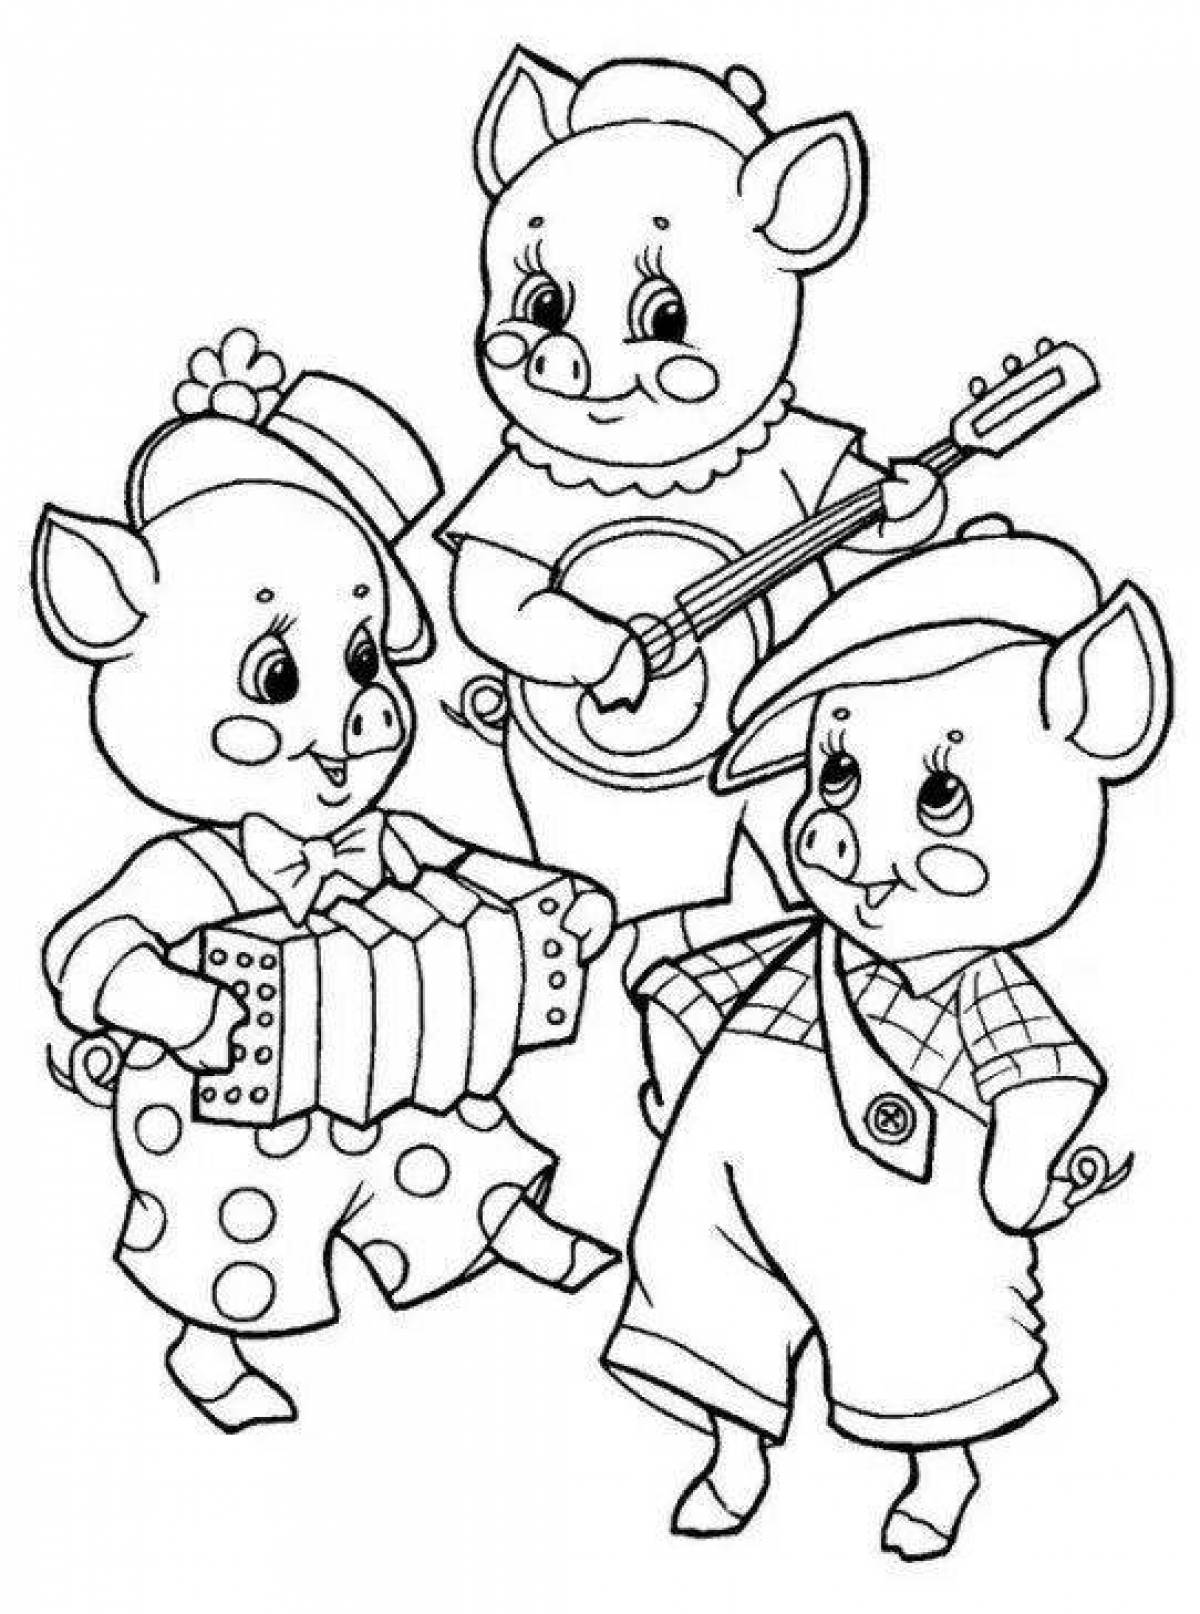 Amazing fairy tale character coloring pages